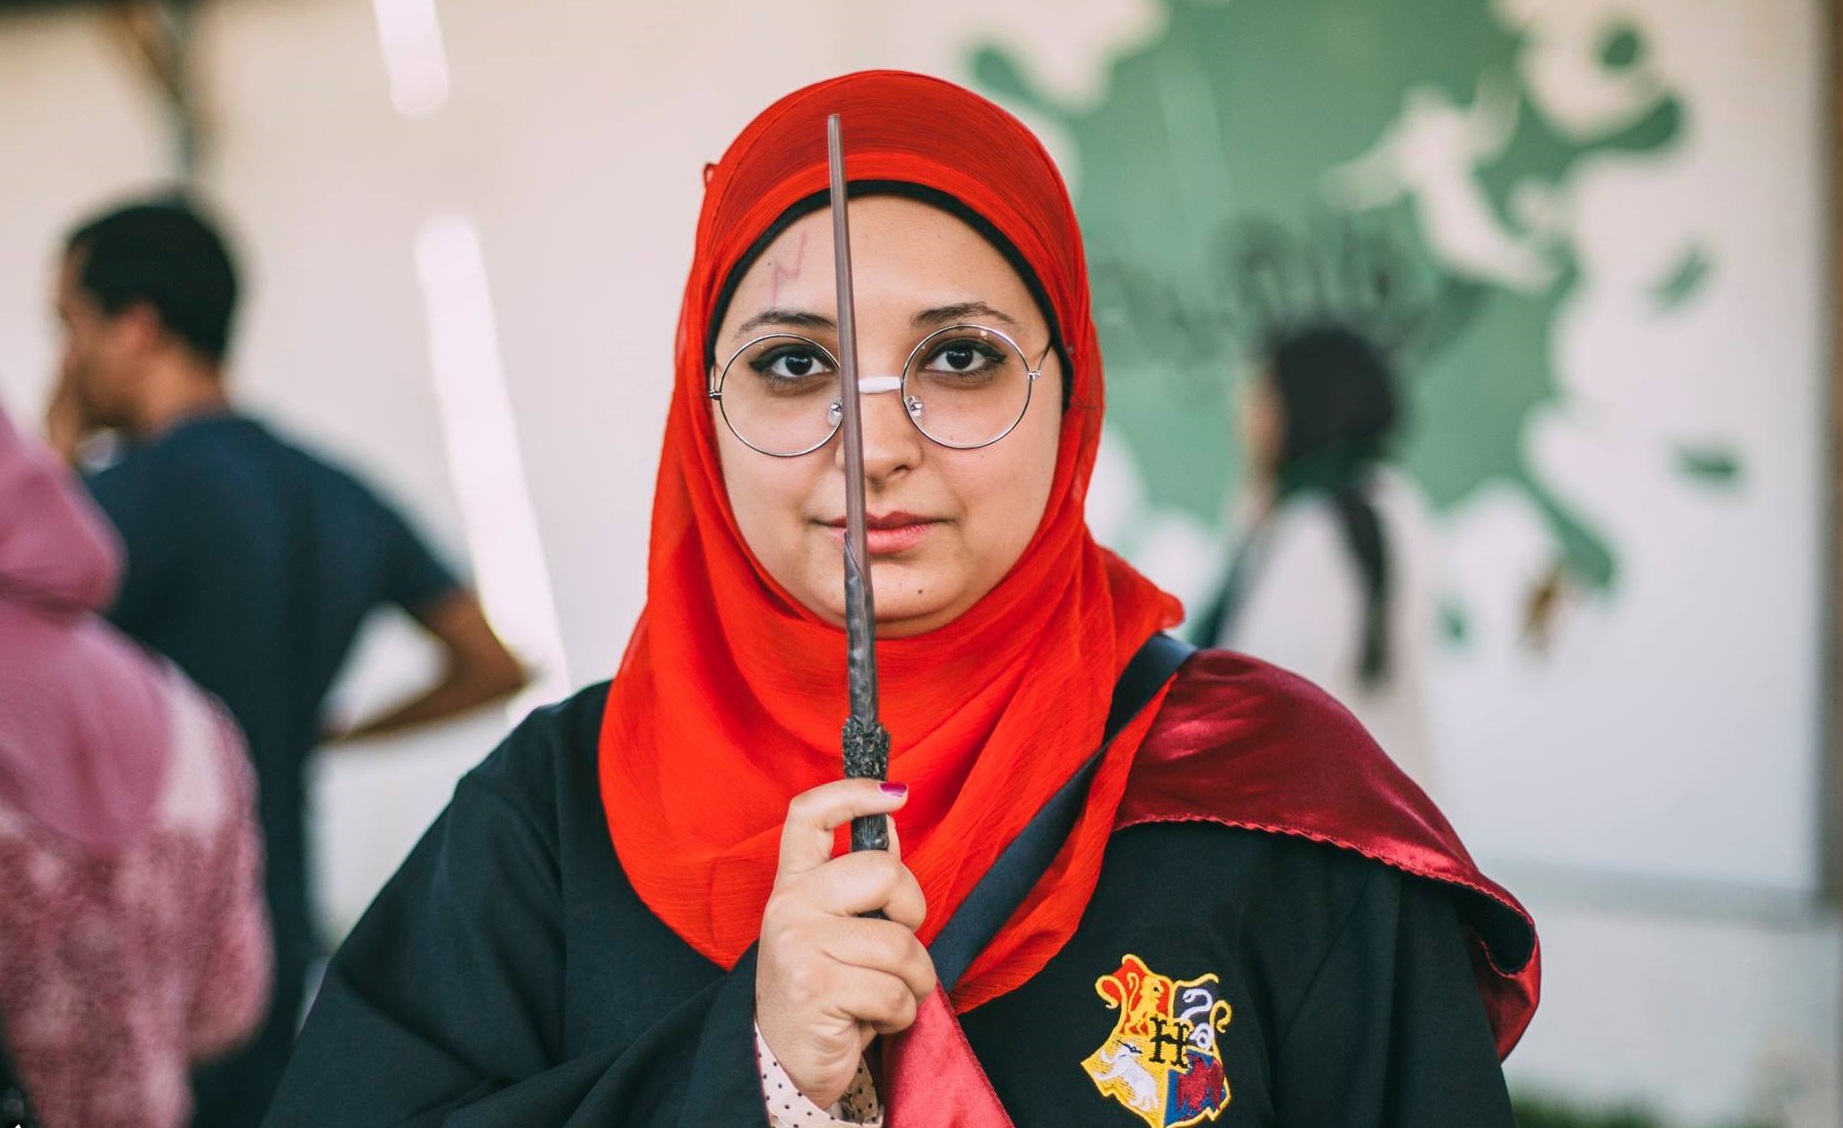 The Triwizard Tournament is Now in Egypt to Support Children in Need